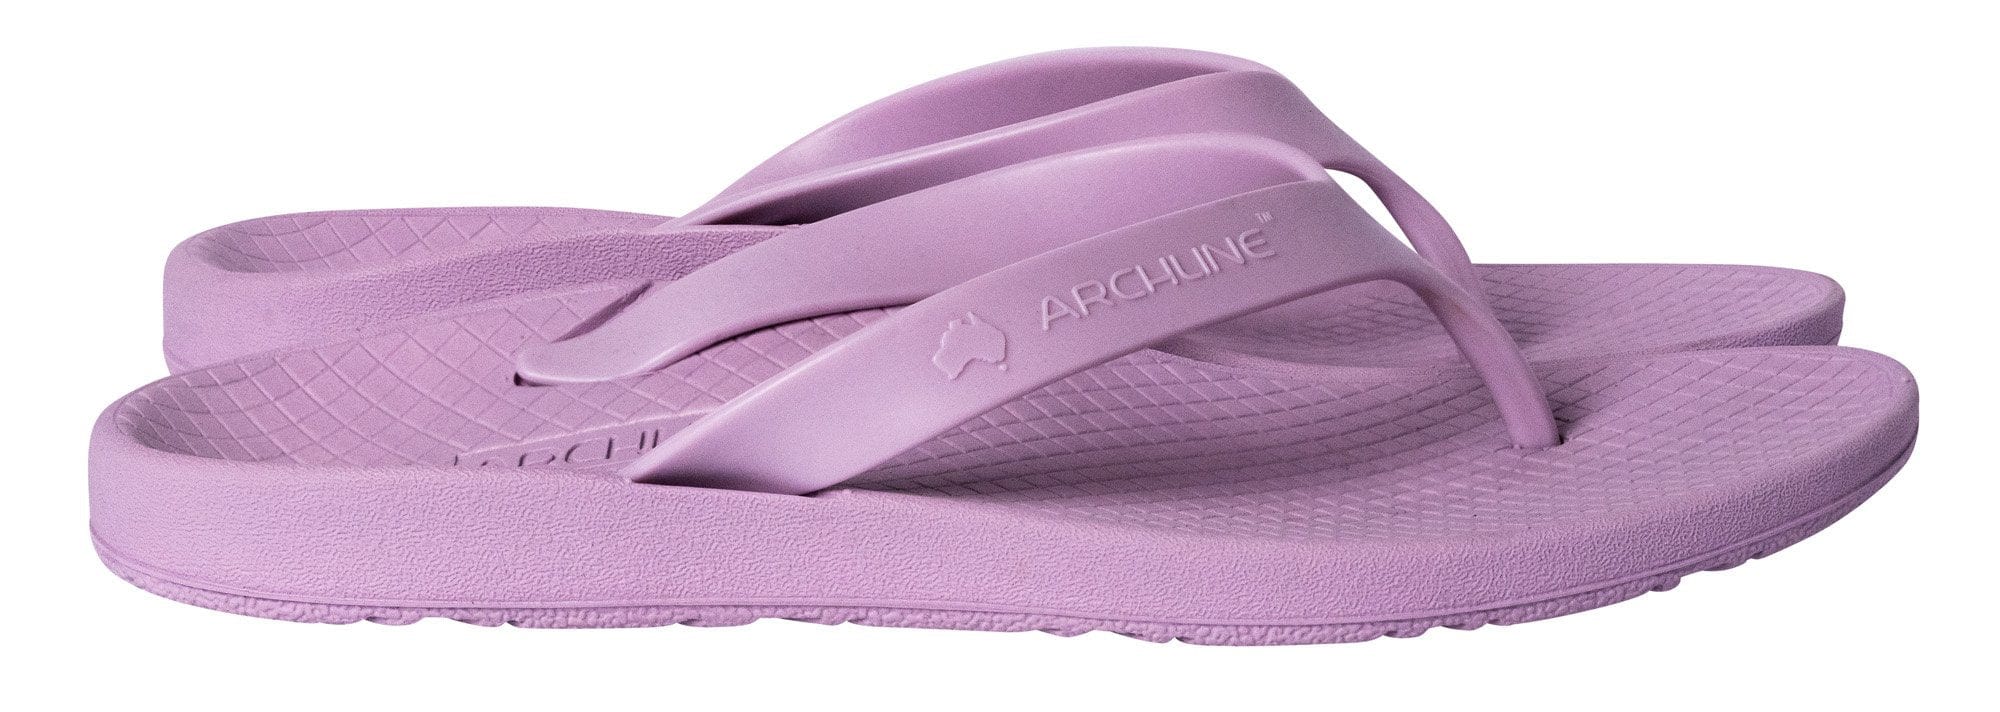 Foot HQ Footwear Archline Orthotic Arch Support Flip Flop Thongs (Lilac Purple)